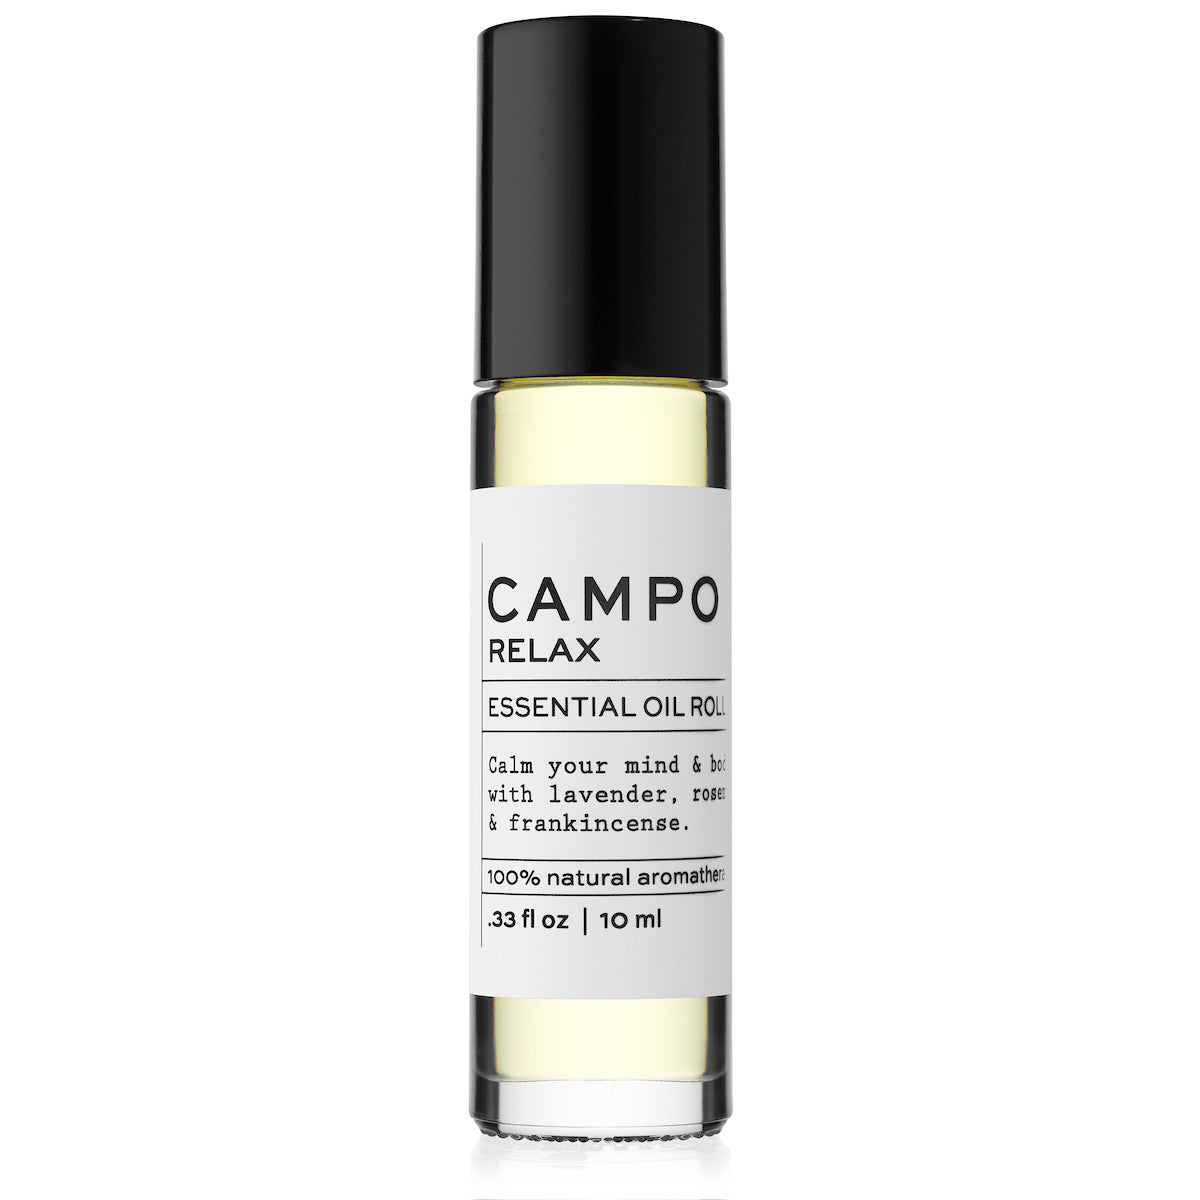 Campo Beauty Essential Oil RELAX Stretch Mark Relief Blend Roll-On that in 10 ml. Soothe sore muscles and pain. Dispels feelings of stress and anxiety to promote deep relaxation. Calm your mind and body naturally with this 100% natural essential oil roll-on blend of Lavender, Rosemary, Frankincense, Neroli Orange Blossom, Sweet Orange, and Bitter Orange.